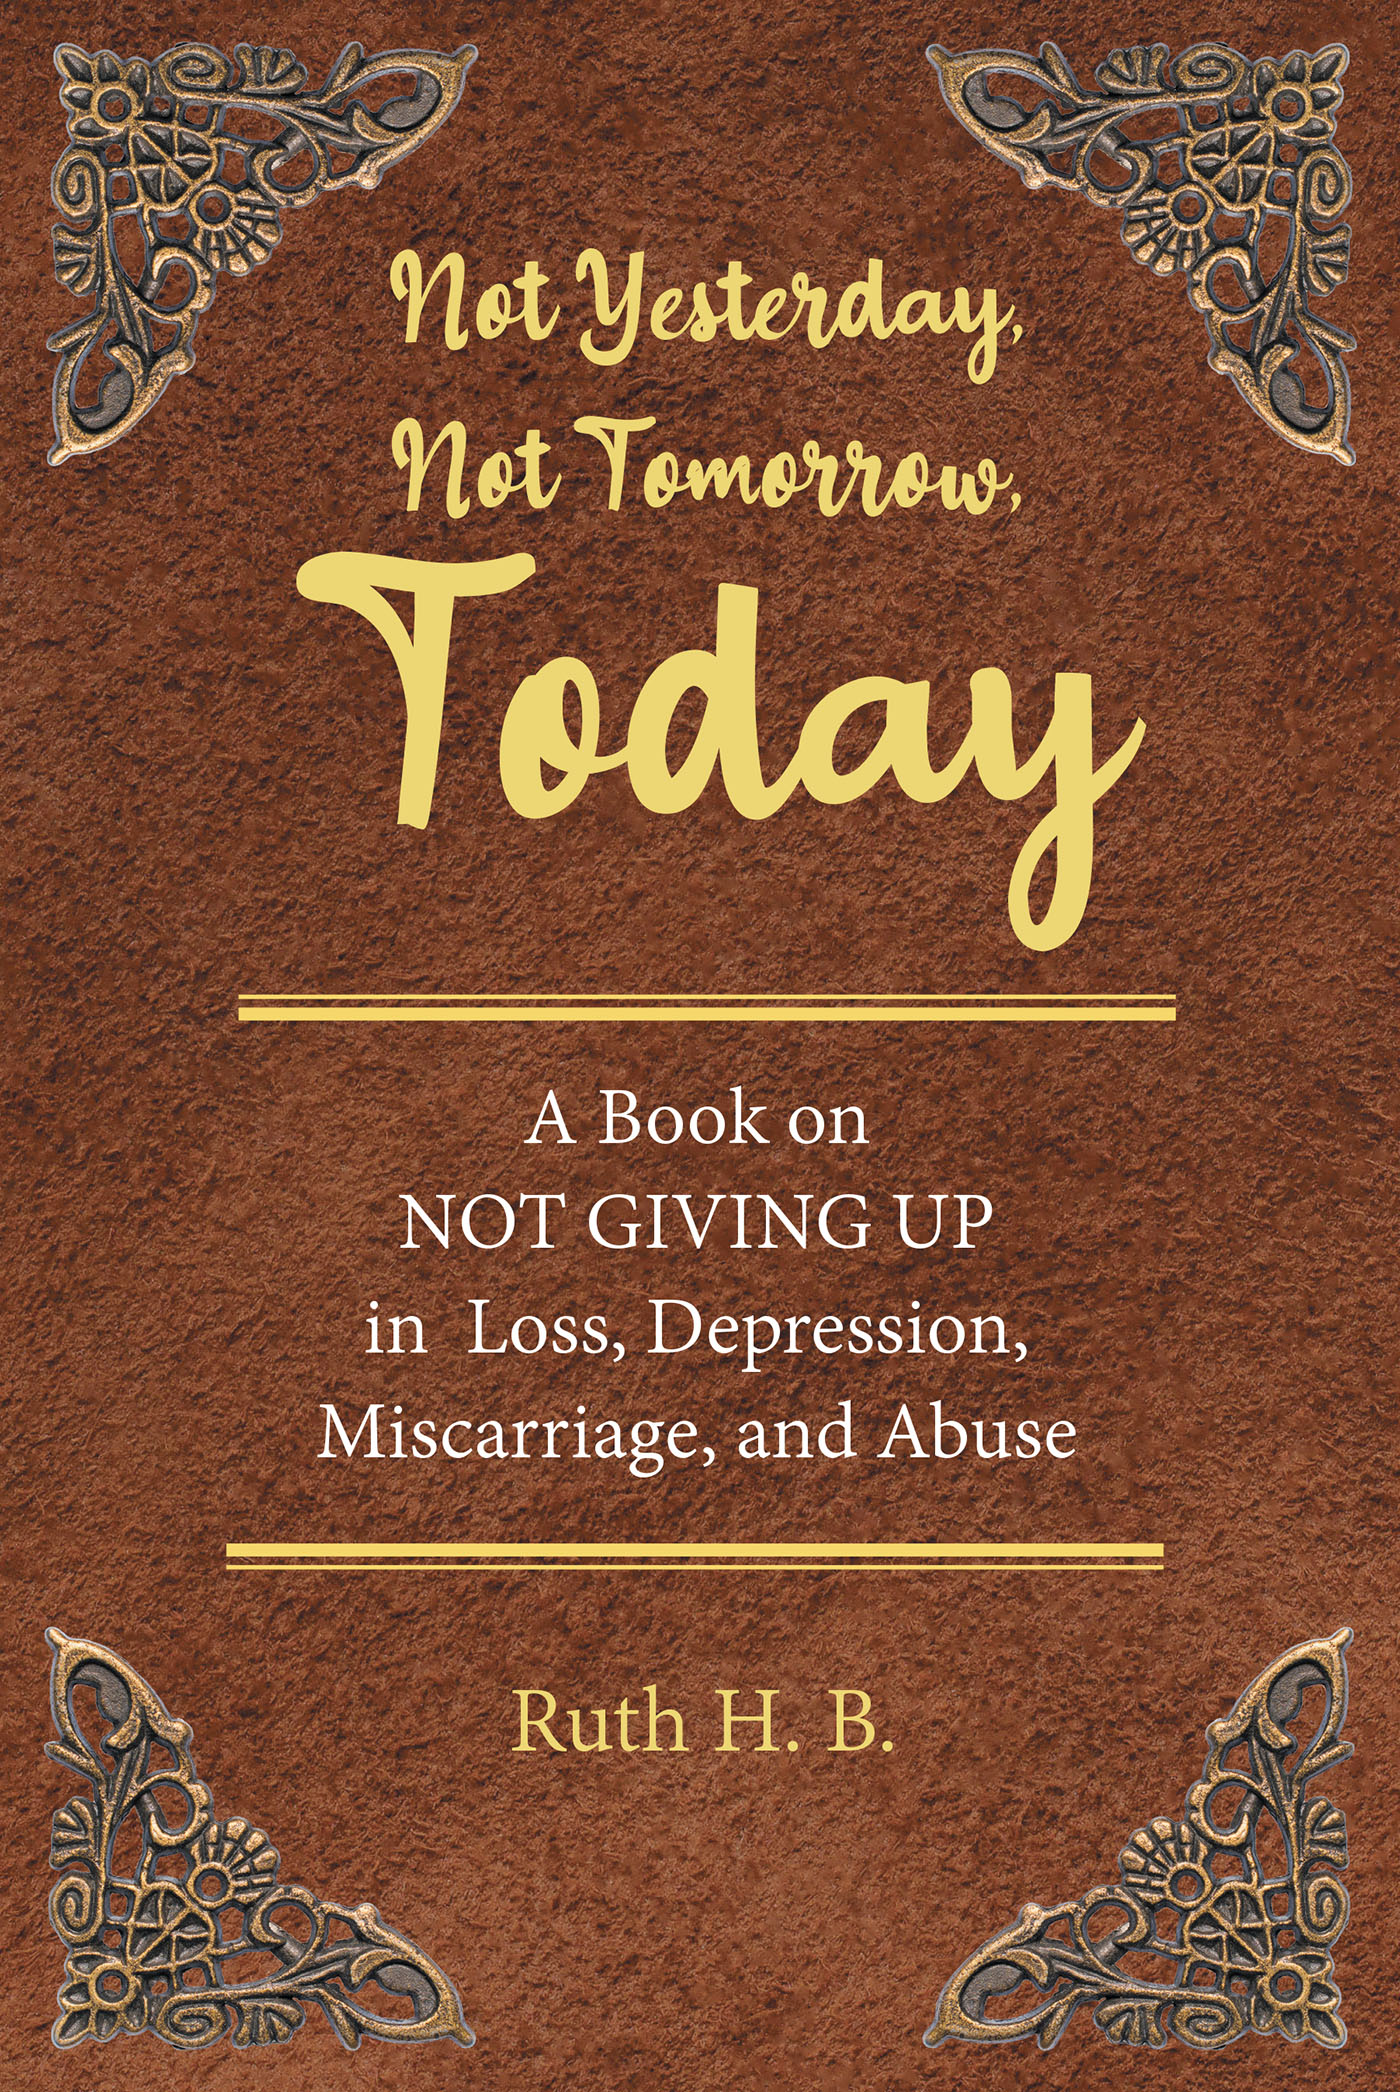 Author Ruth H. B.’s New Book, "Not Yesterday, Not Tomorrow, Today," Reveals the Courage Displayed by the Author to Survive Countless Events of Trauma in Her Life